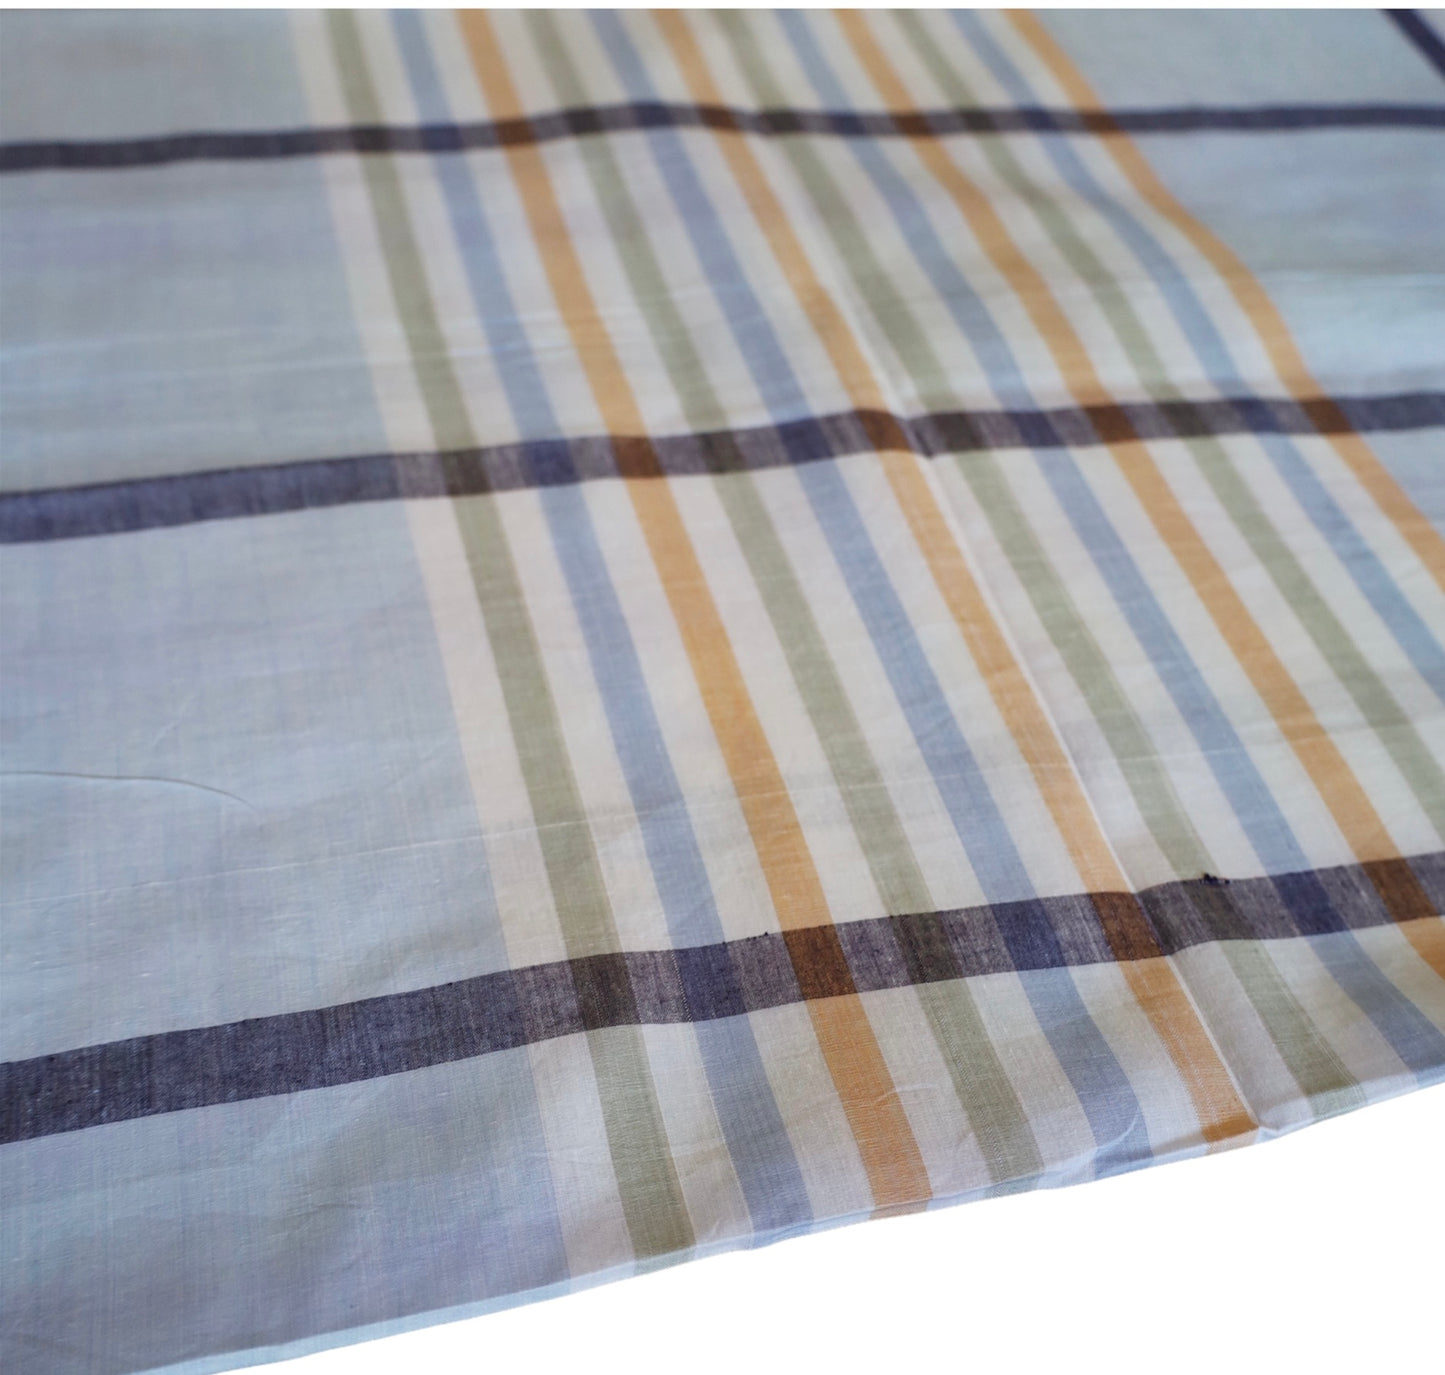 One-of-a-Kind Handloom Cotton Fabric - Blue and Navy with Pastel Stripes